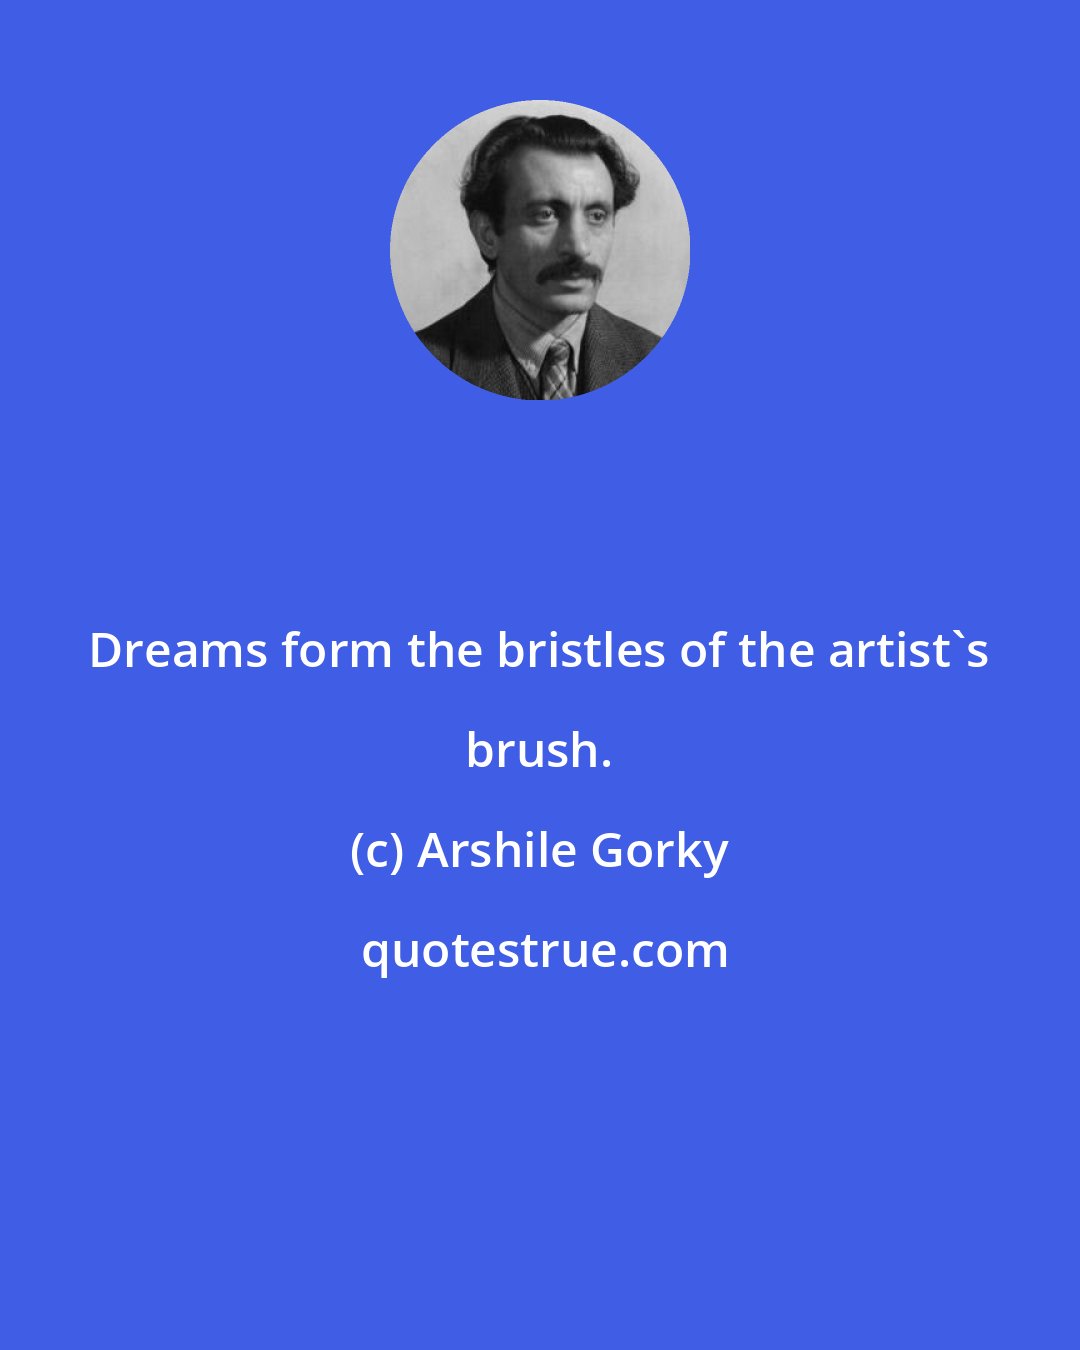 Arshile Gorky: Dreams form the bristles of the artist's brush.